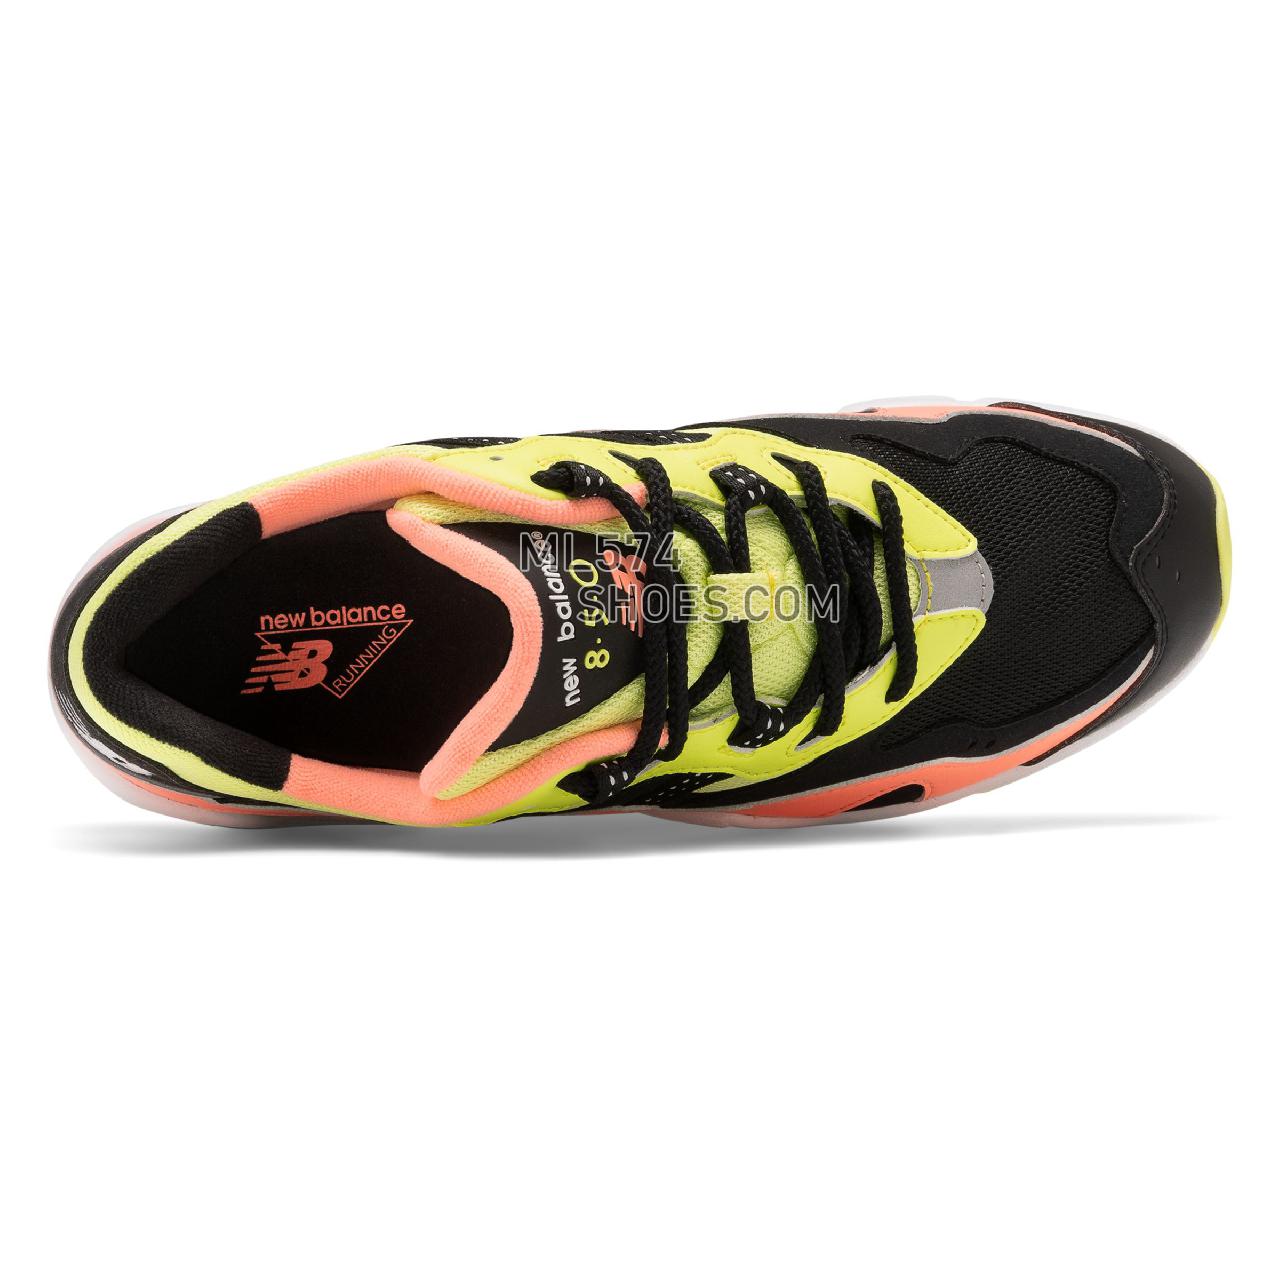 New Balance 850 - Men's Sport Style Sneakers - Black with Ginger Pink - ML850KL1